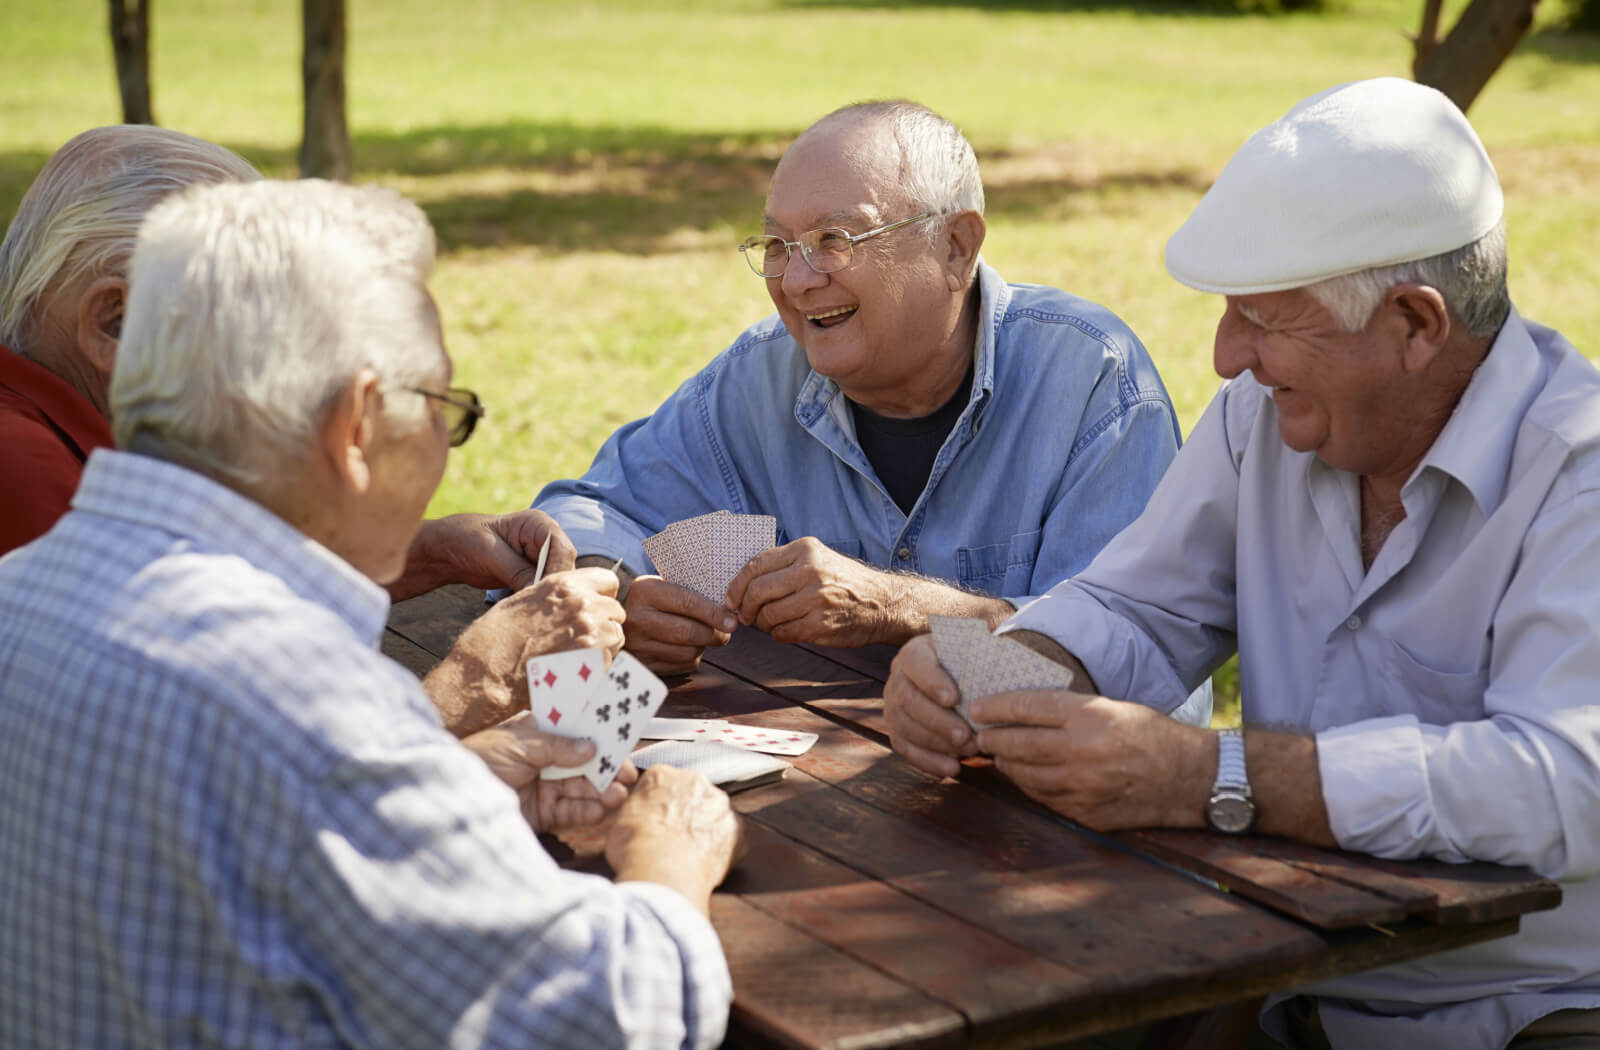 a group of senior men play a card game at a picnic table outside in the sun